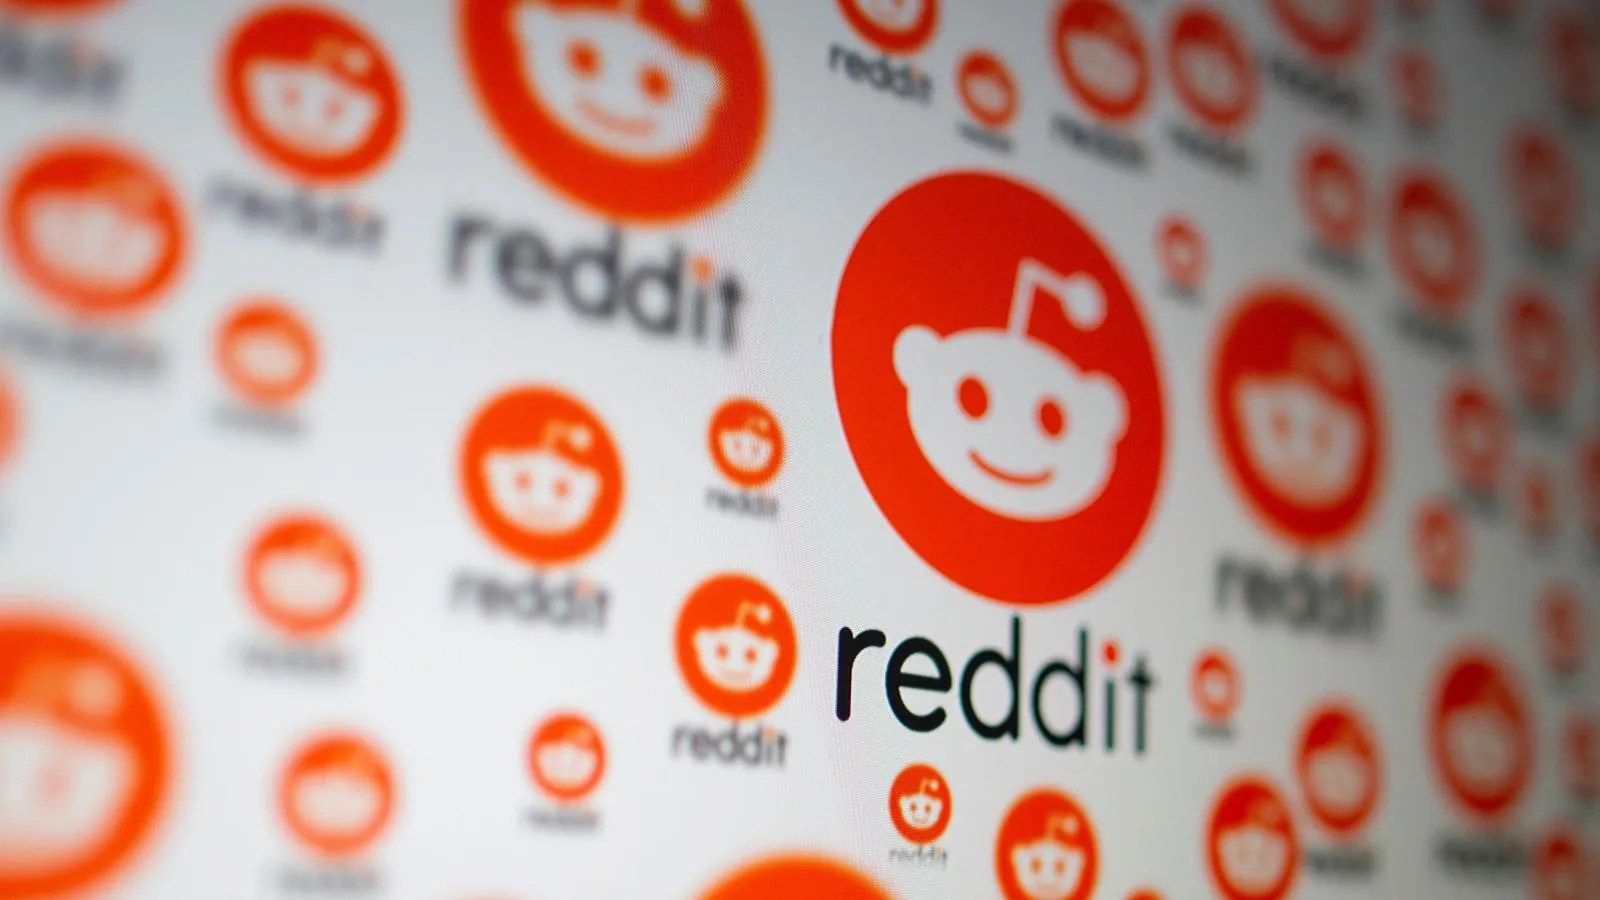 How to Change Your Username on Reddit